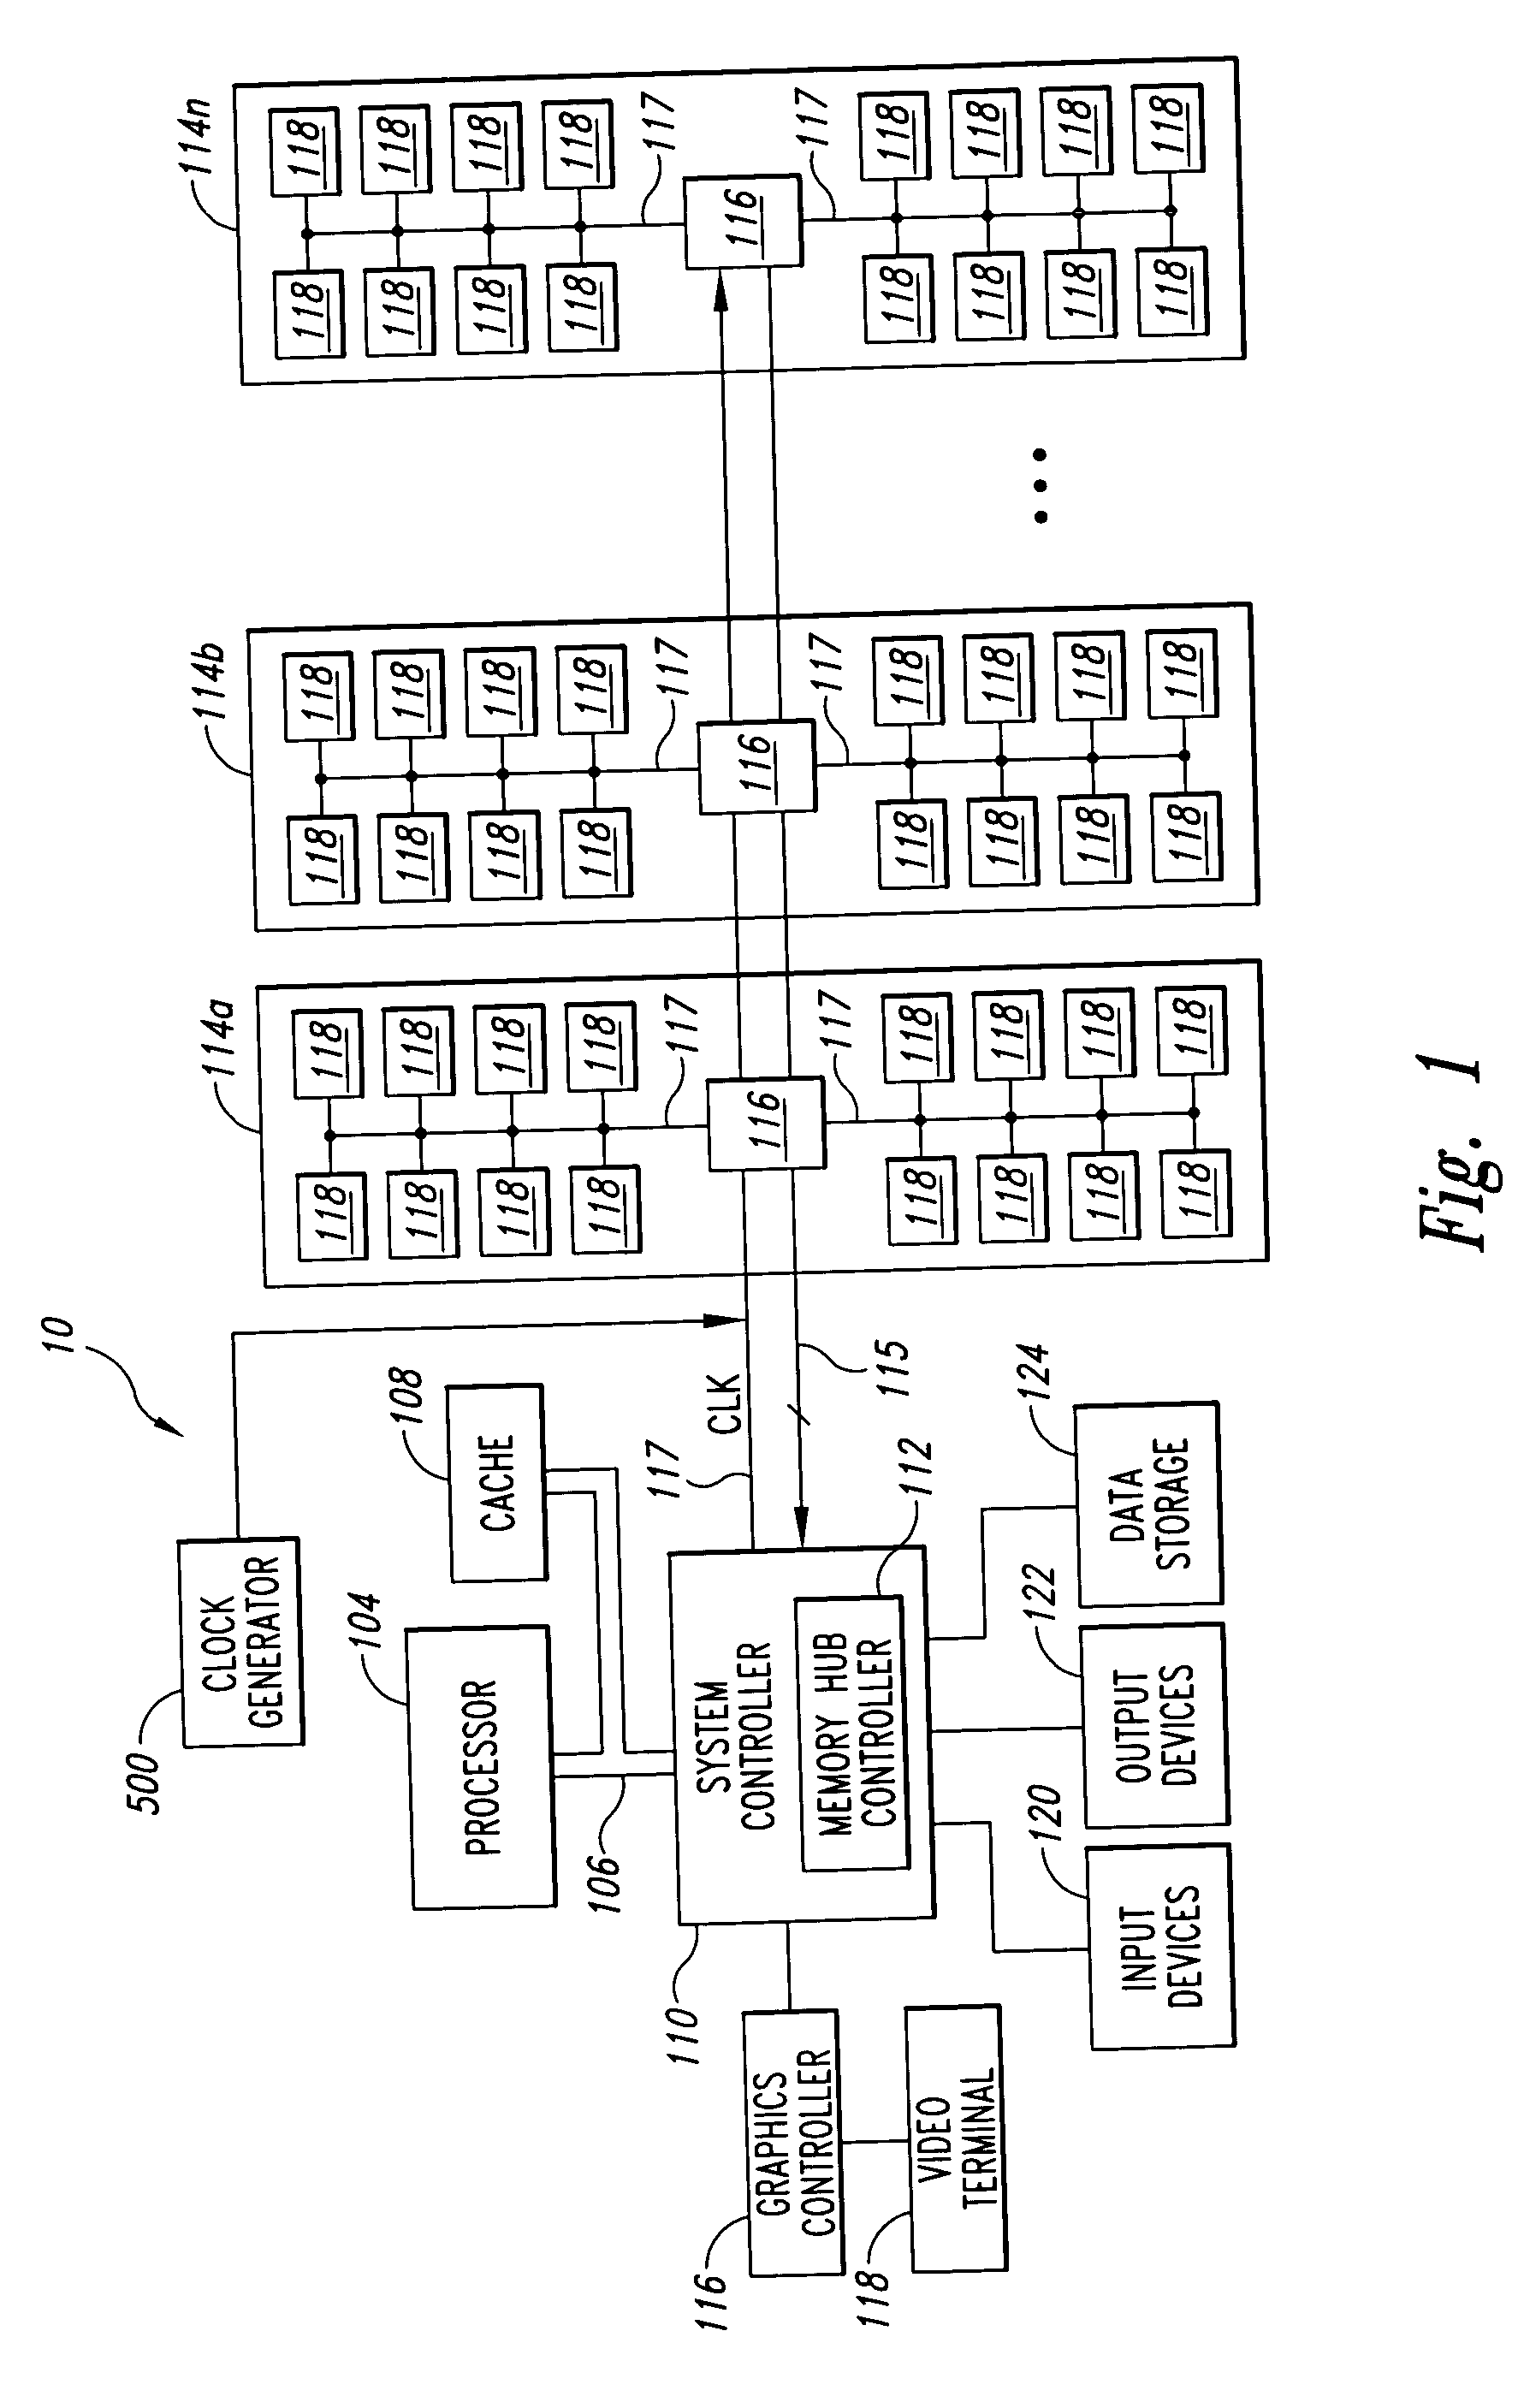 System and method for using a learning sequence to establish communications on a high-speed nonsynchronous interface in the absence of clock forwarding